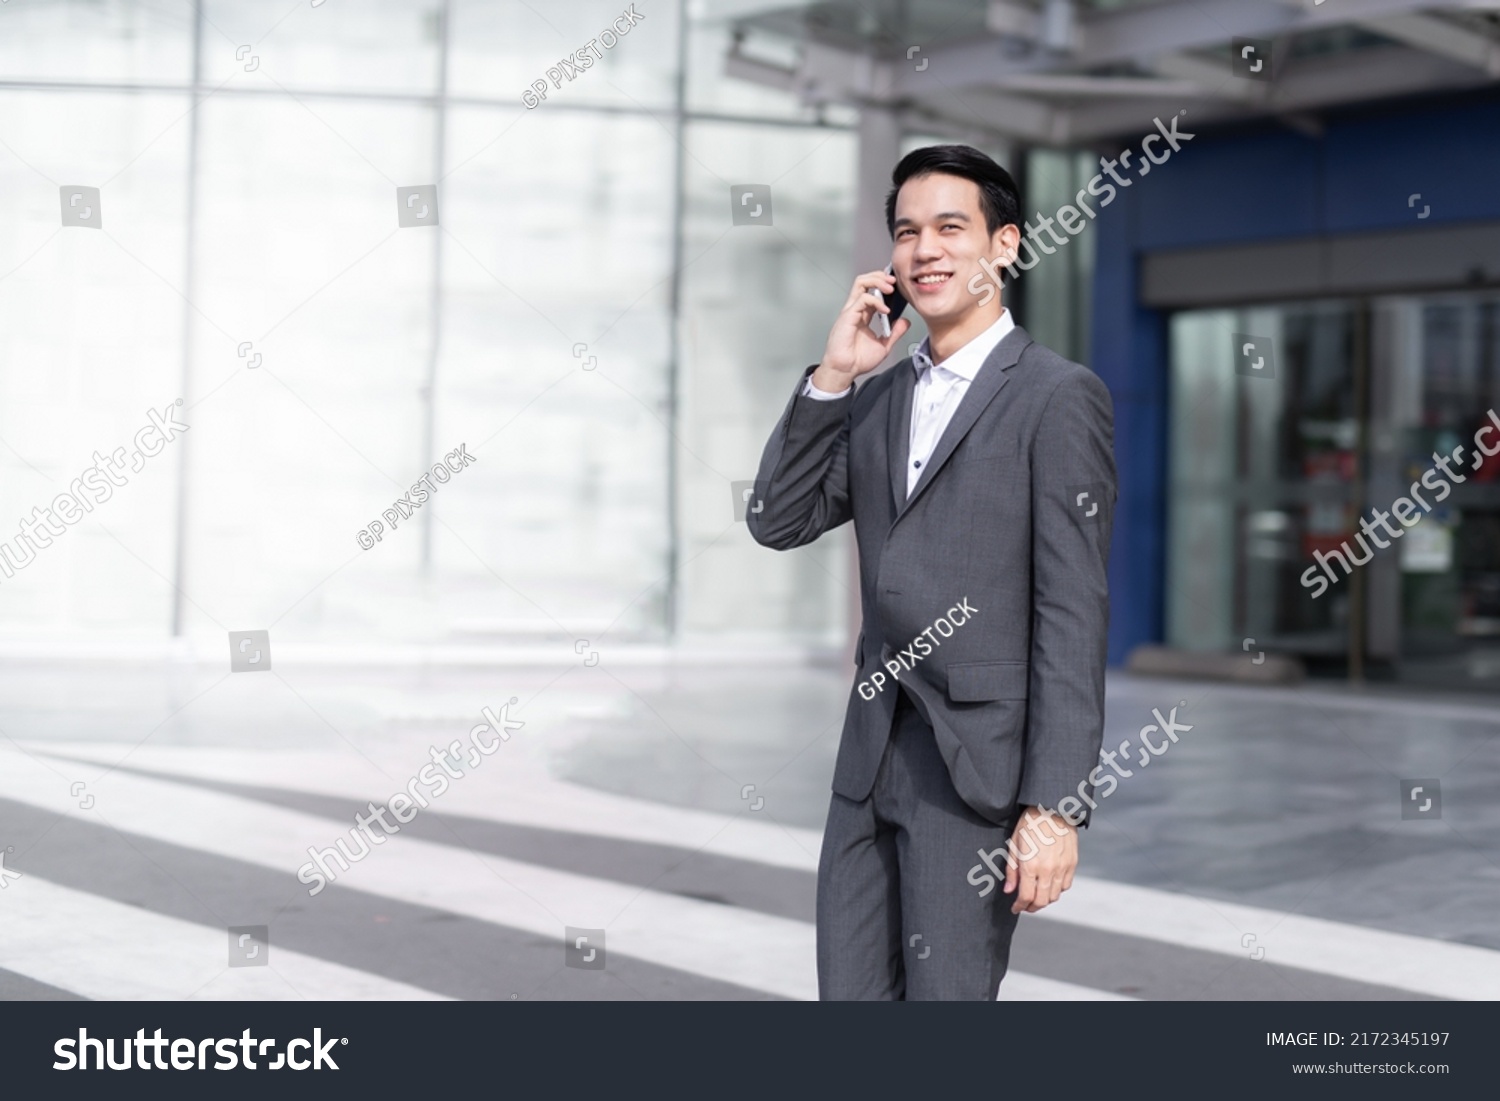 Asian Man with smartphone walking against street blurred building background, Fashion business photo of handsome man in casual suite with smart phone.  #2172345197